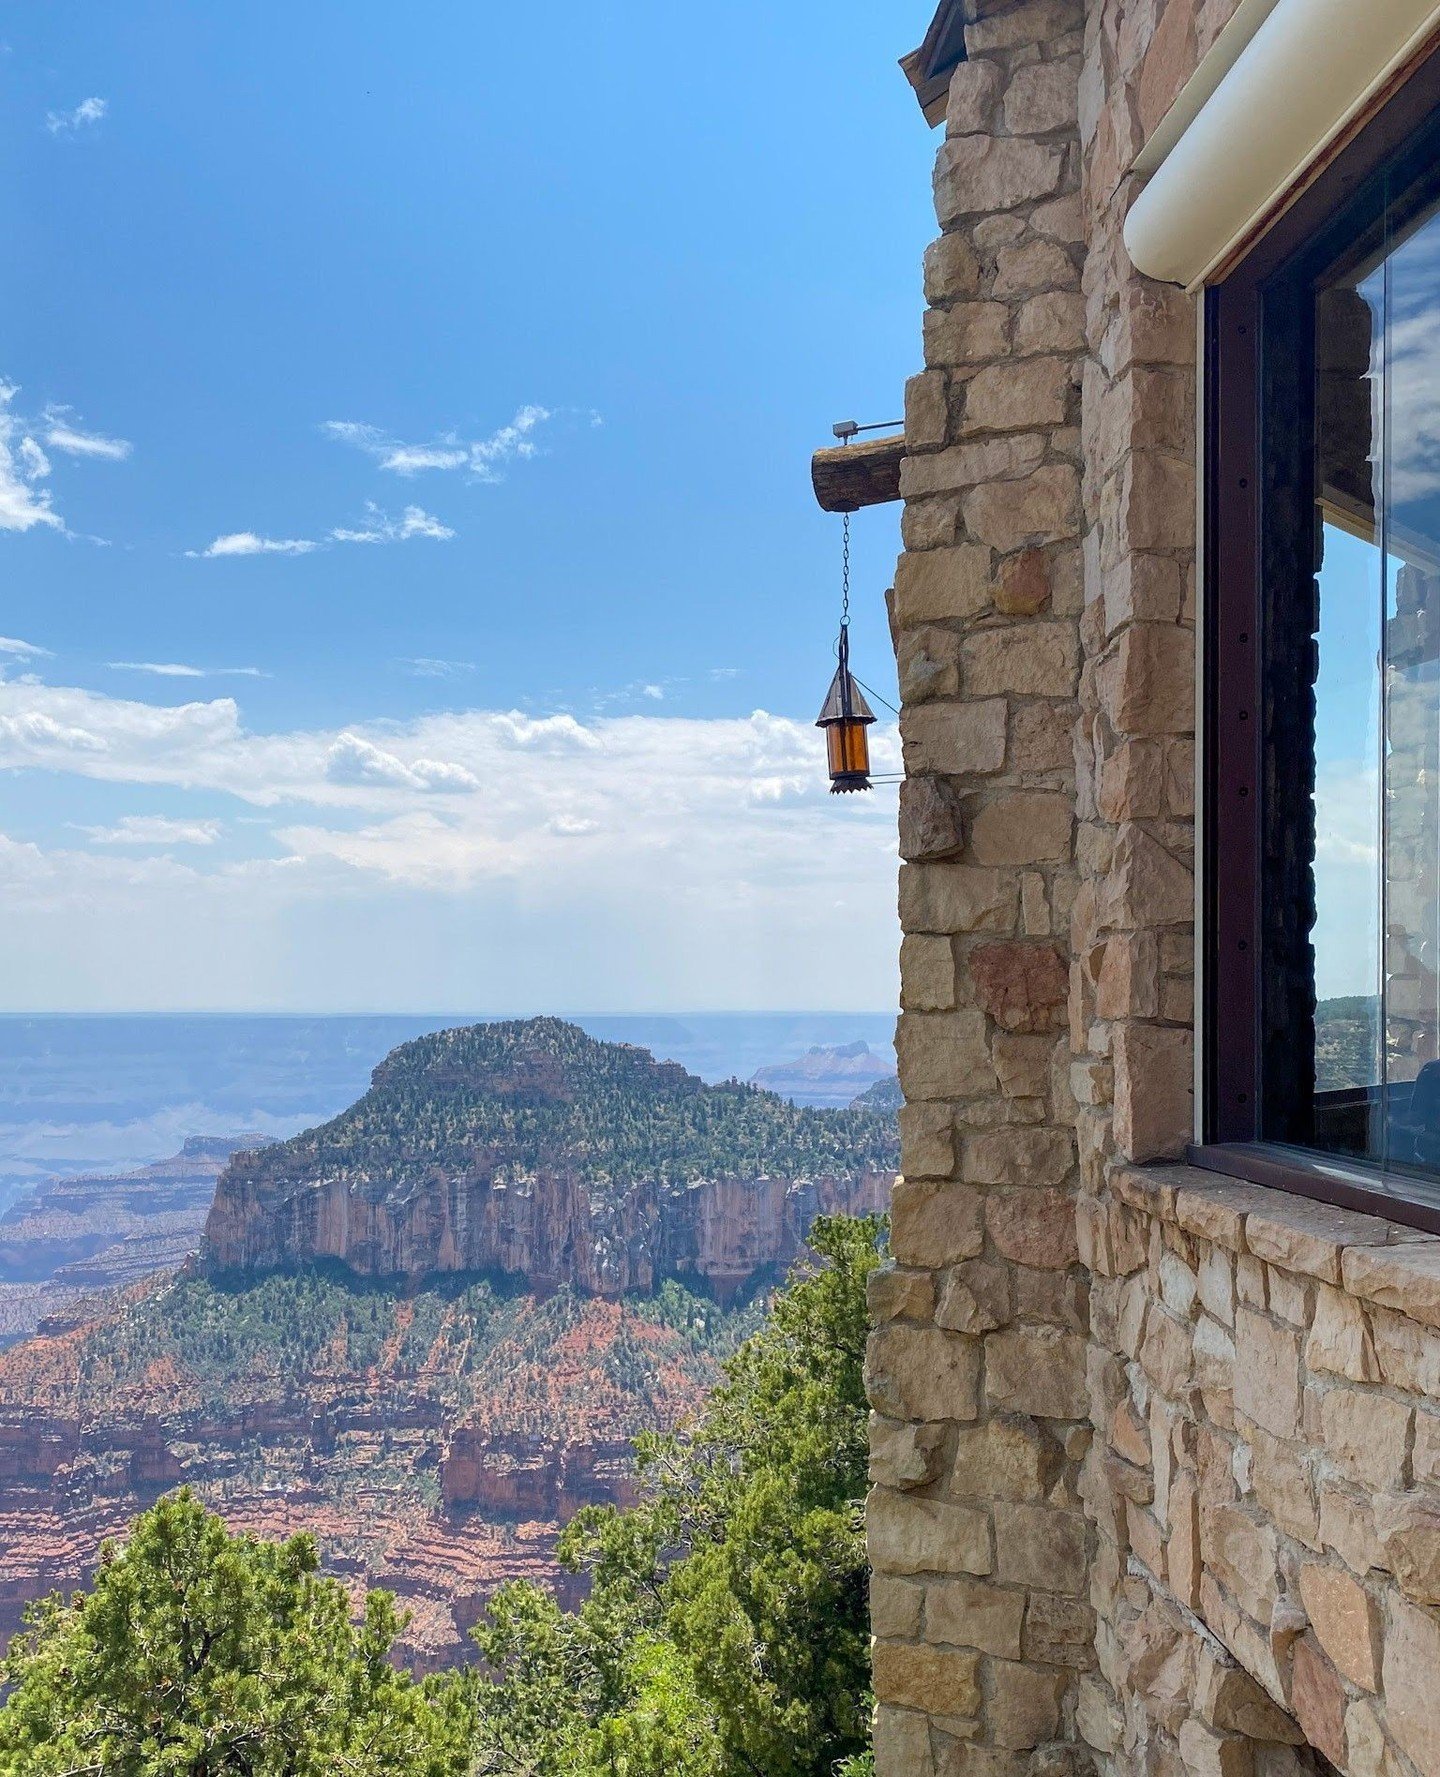 🤠 NORTH RIM OPENS TOMORROW 🤠⁠
⁠
We all know and love the Grand Canyon, but did you know you can actually get off this beaten path when you plan a stop at the second-most-visited National Park in the nation? That's right! About 10% of all visitors t